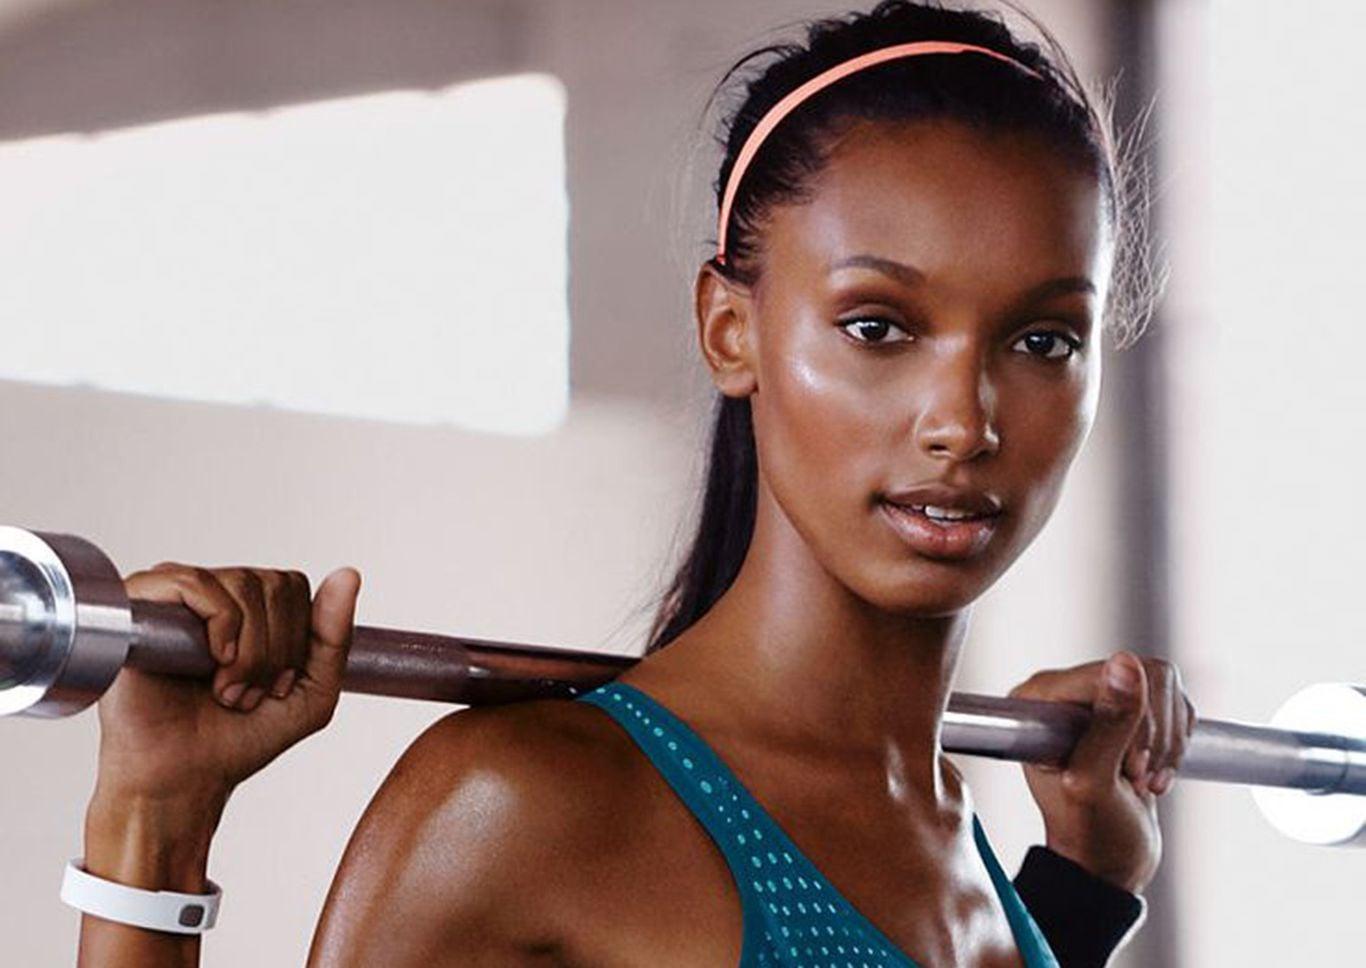 picture of Jasmine Tookes workout 2016. HD Image